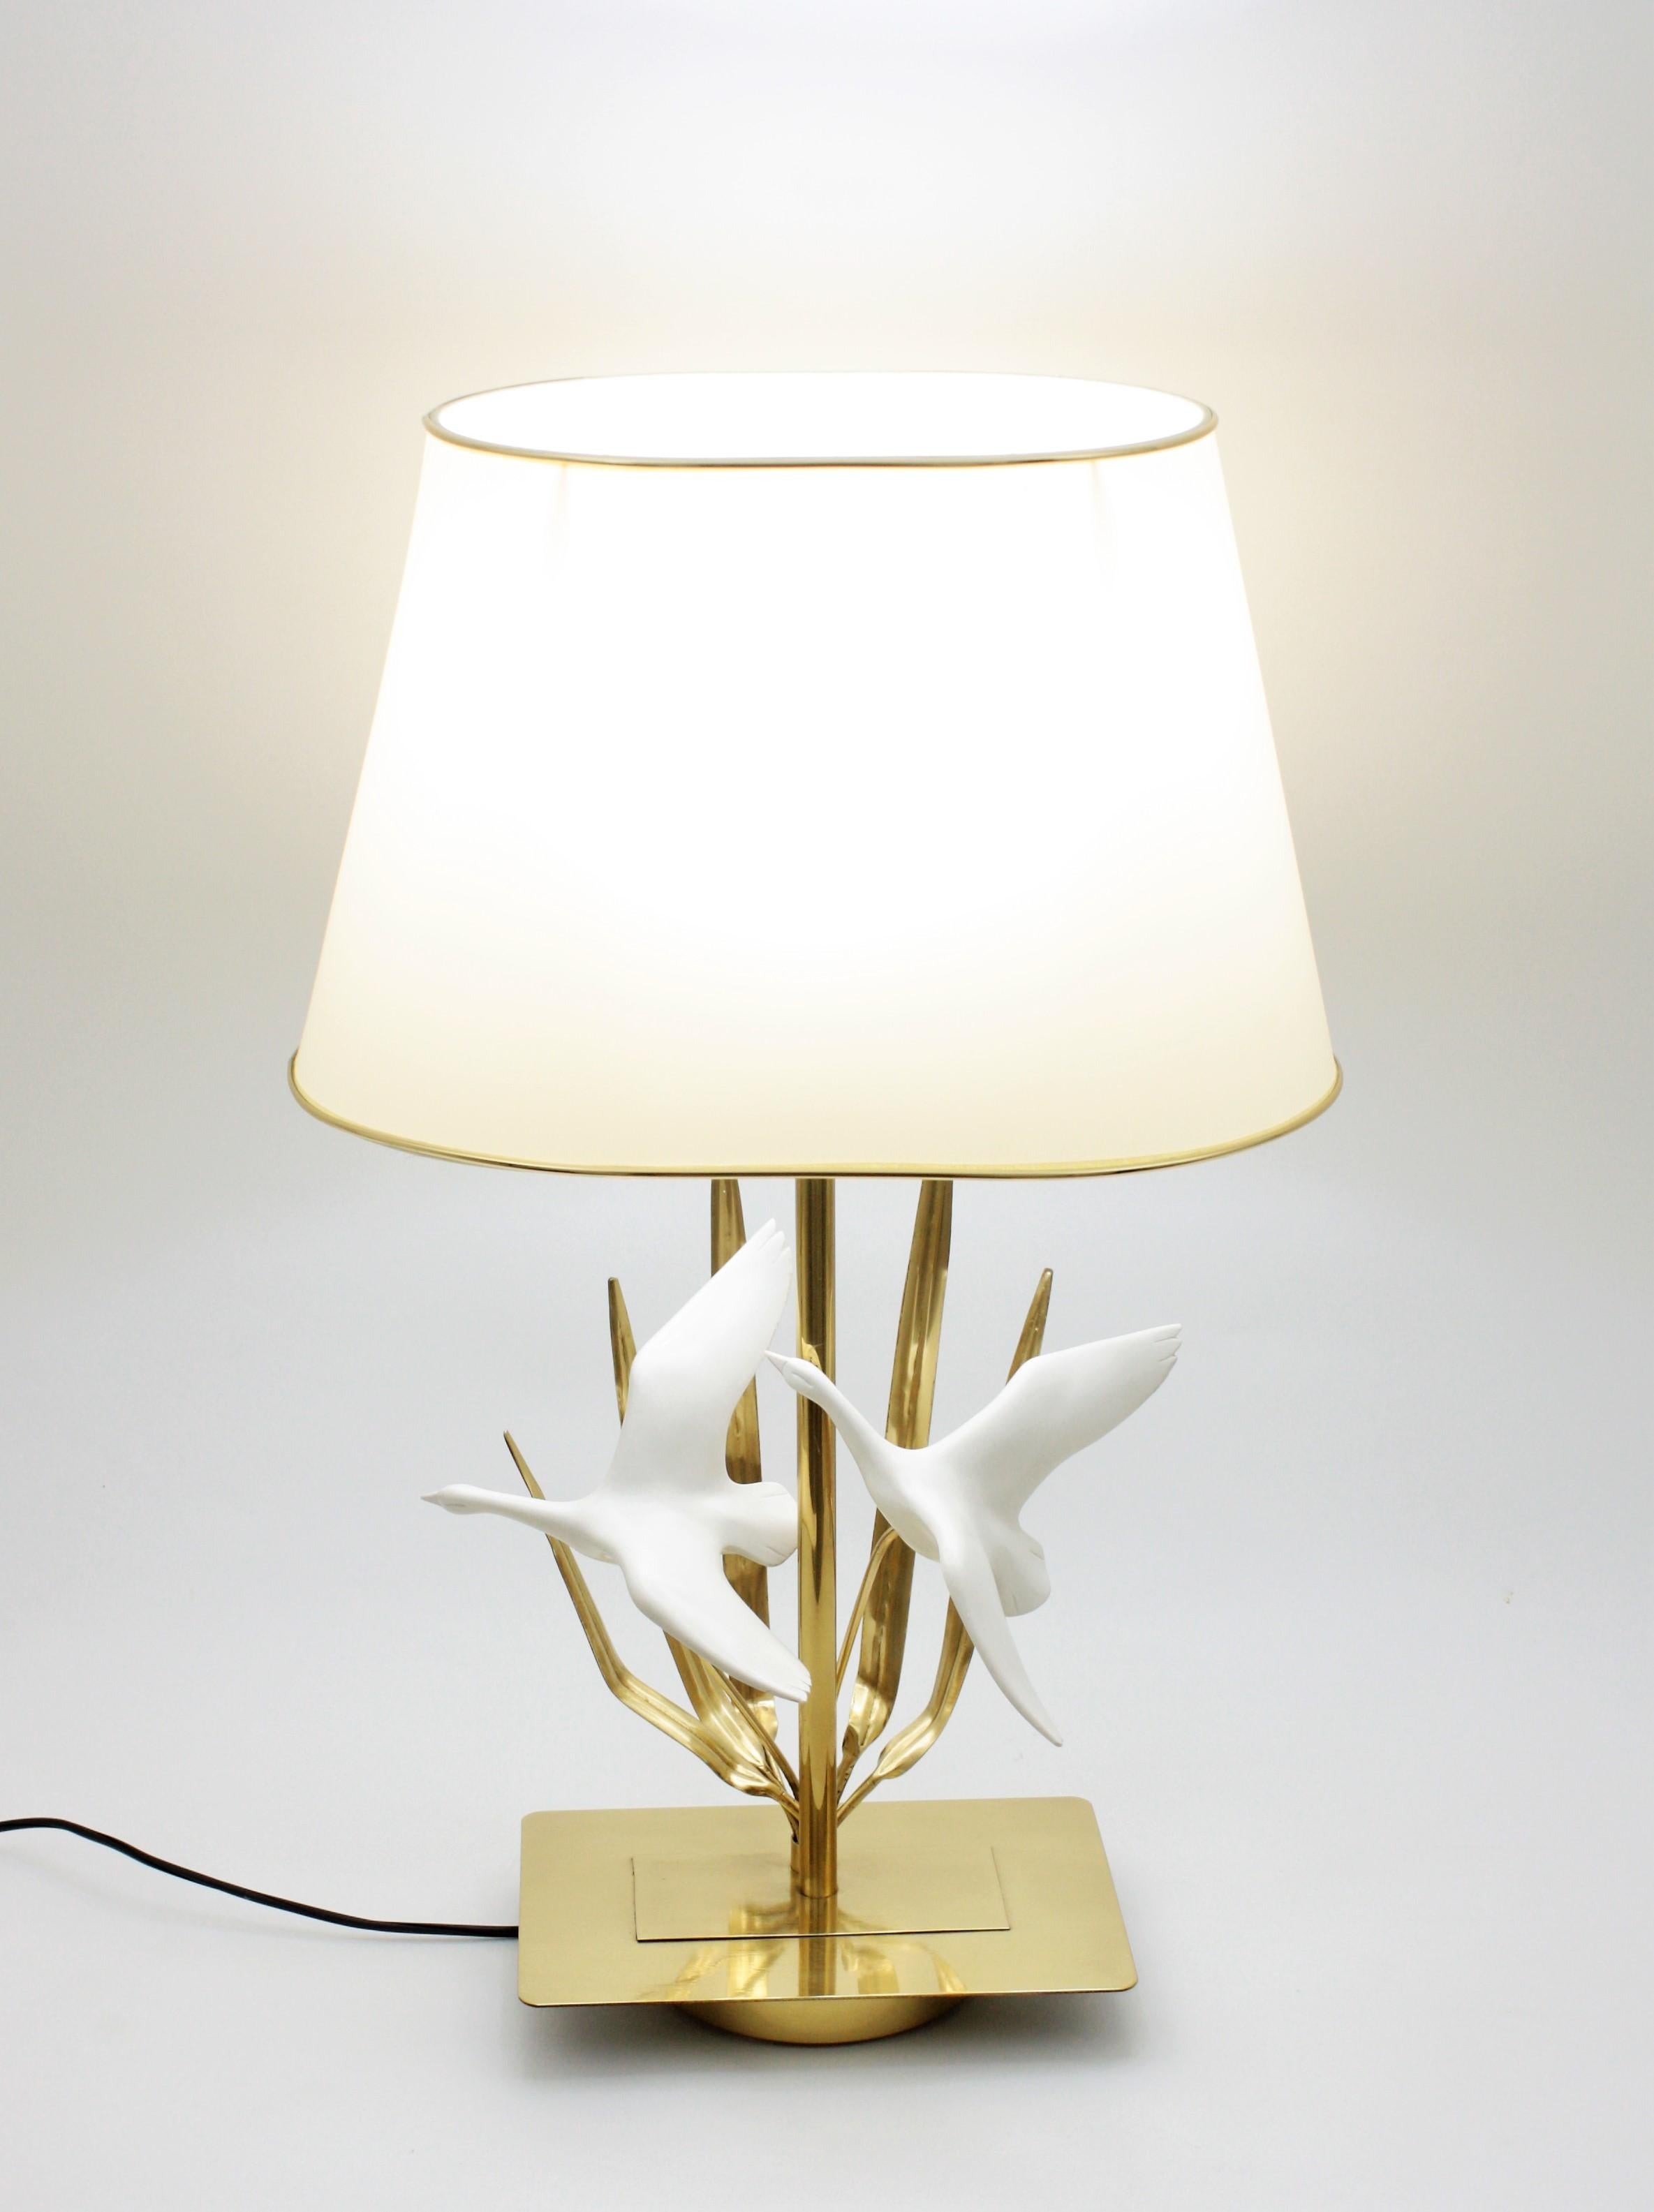 French Midcentury Brass Table Lamp with Flying Birds Motif For Sale 2